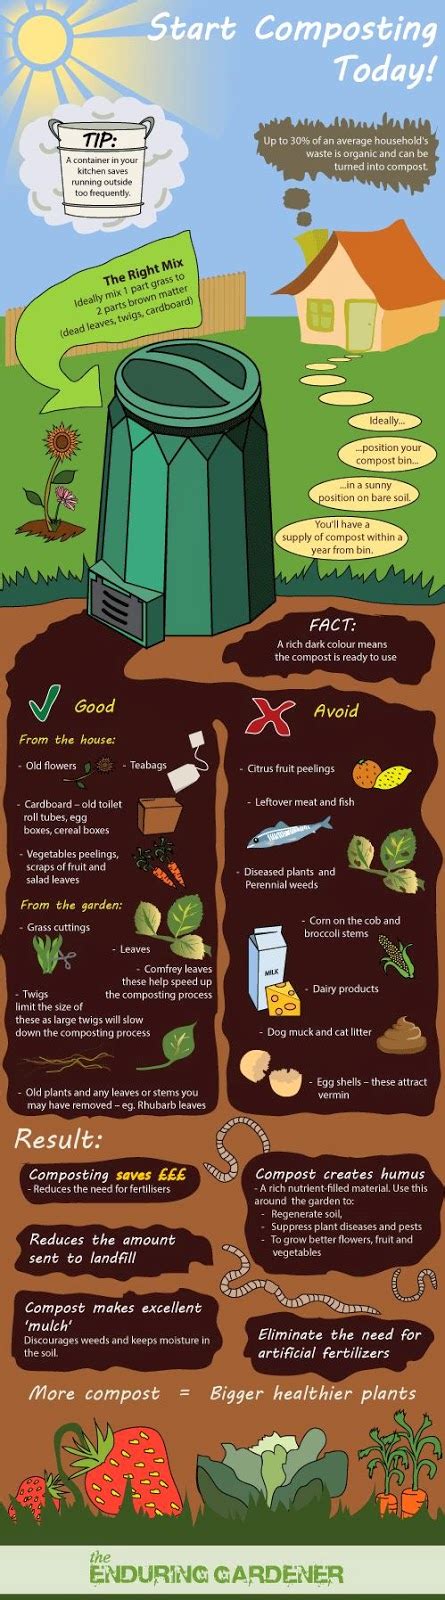 Start Composting Today